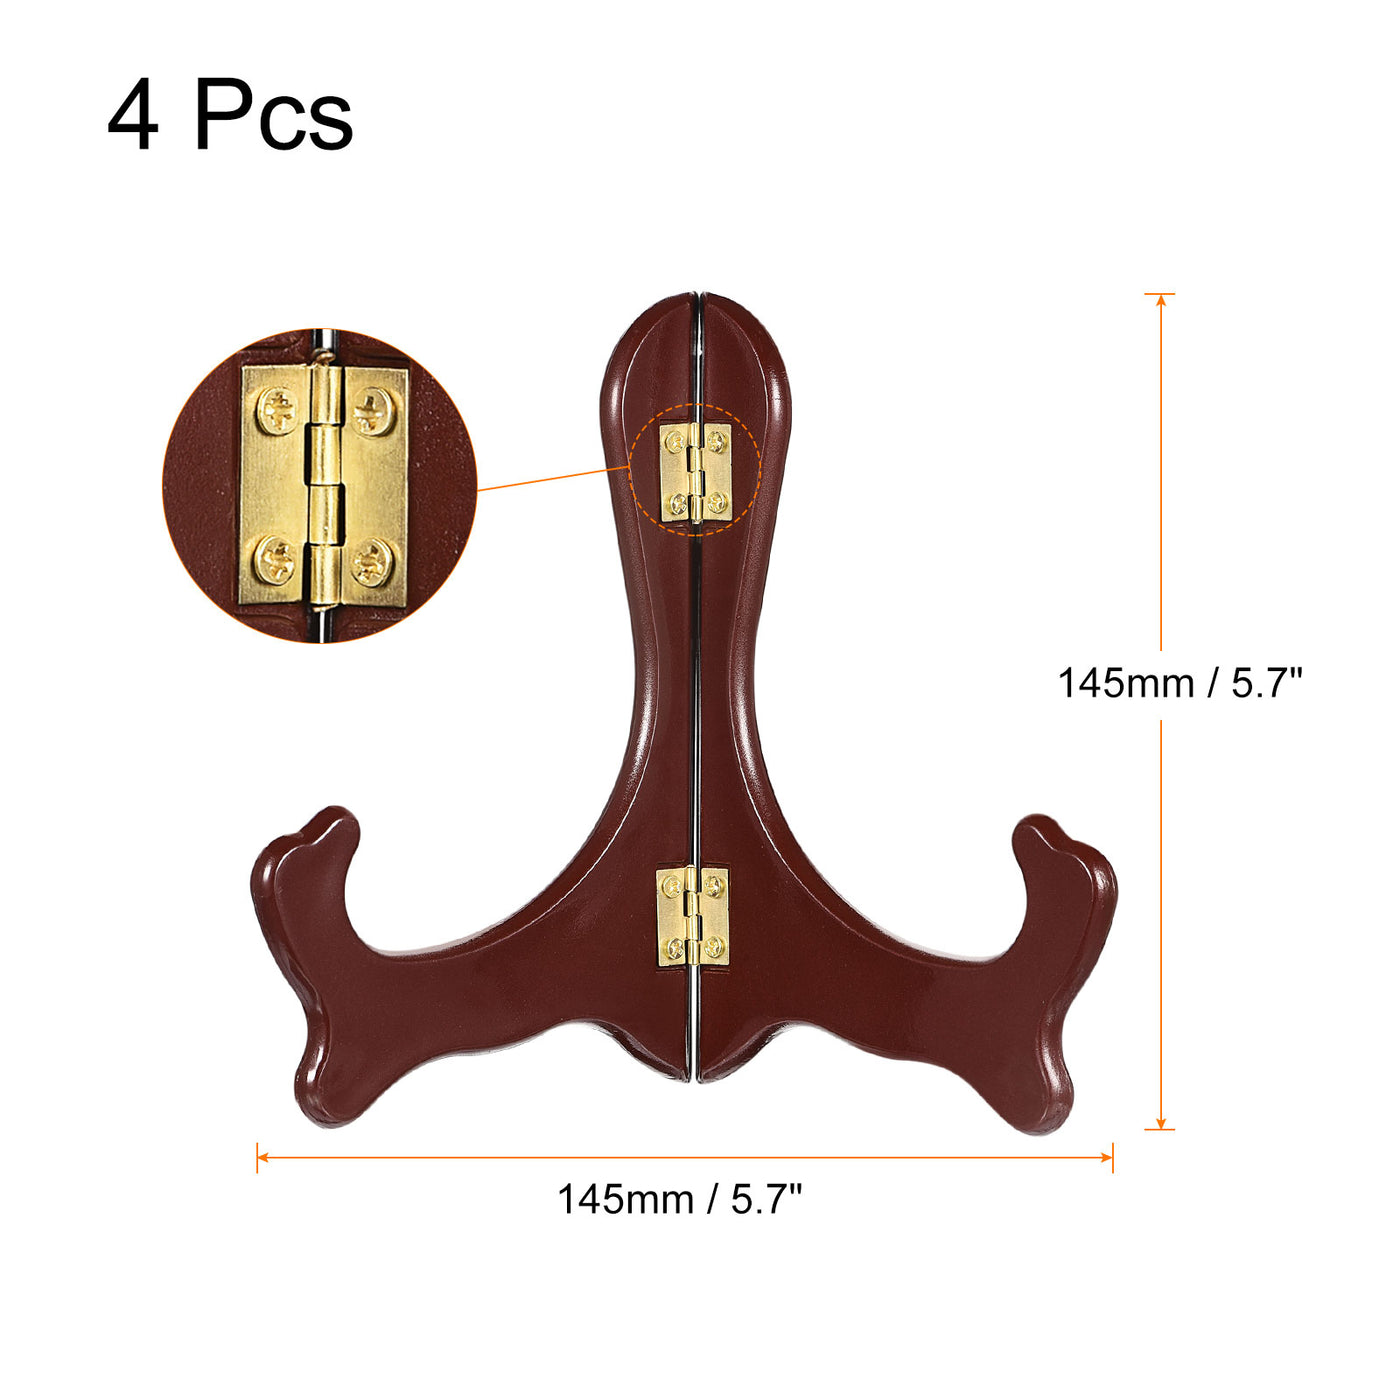 uxcell Uxcell 4pcs 5.7" Easel Plate Holder, Wood-like Plastic Folding Display Stand Brown for Decorative Picture Frame